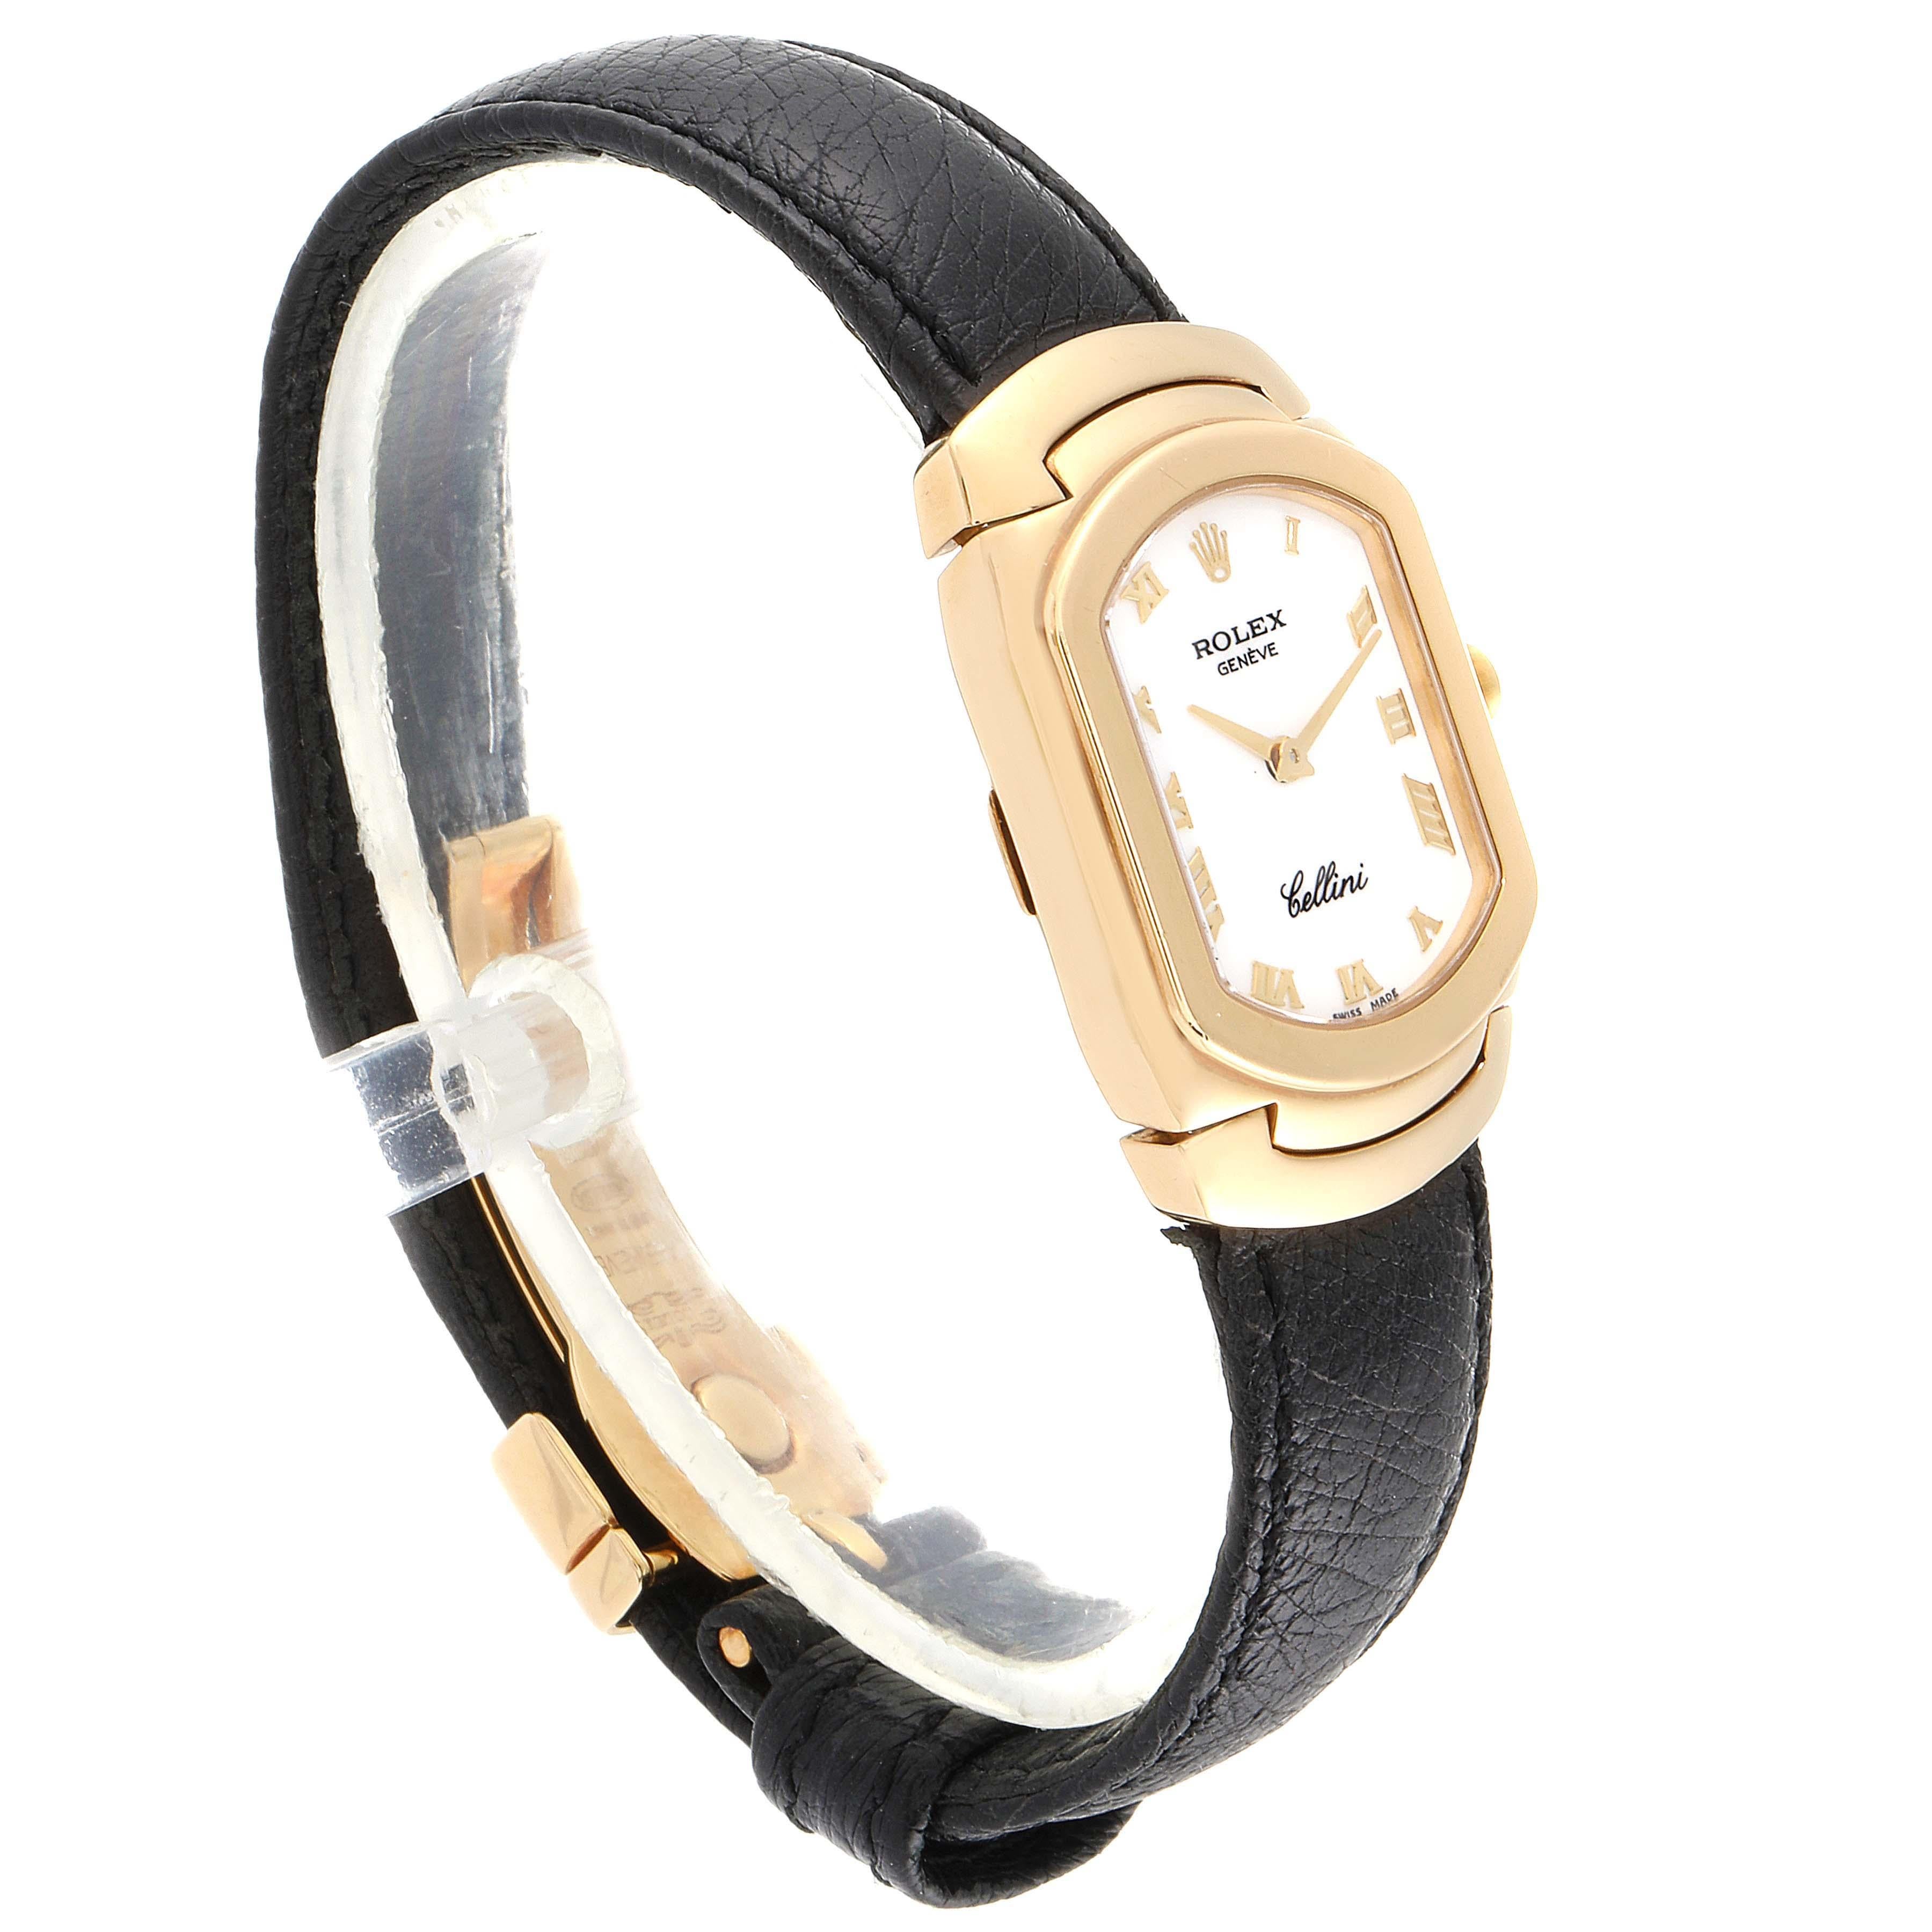 Rolex Cellini Cellissima Yellow Gold White Dial Ladies Watch 6631 In Excellent Condition For Sale In Atlanta, GA